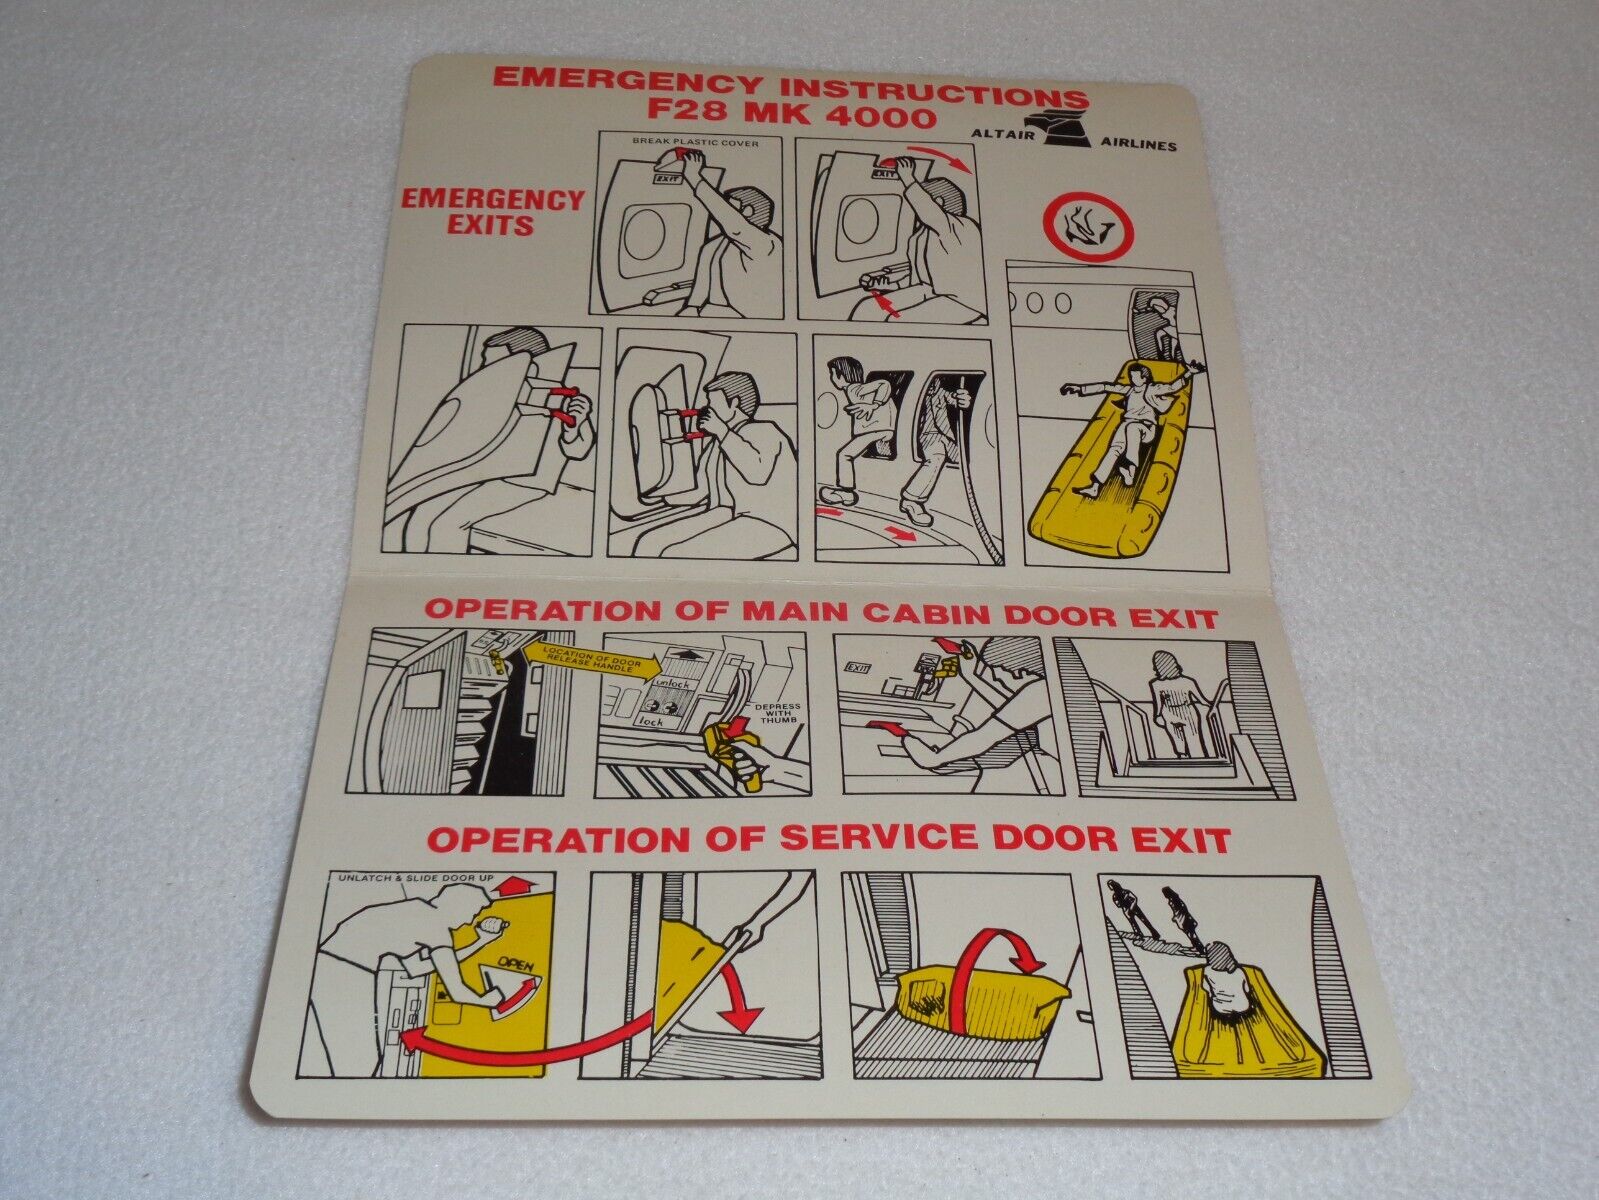 Altair Airlines F28 MK 4000 Emergency Instructions Vintage Original Safety Card